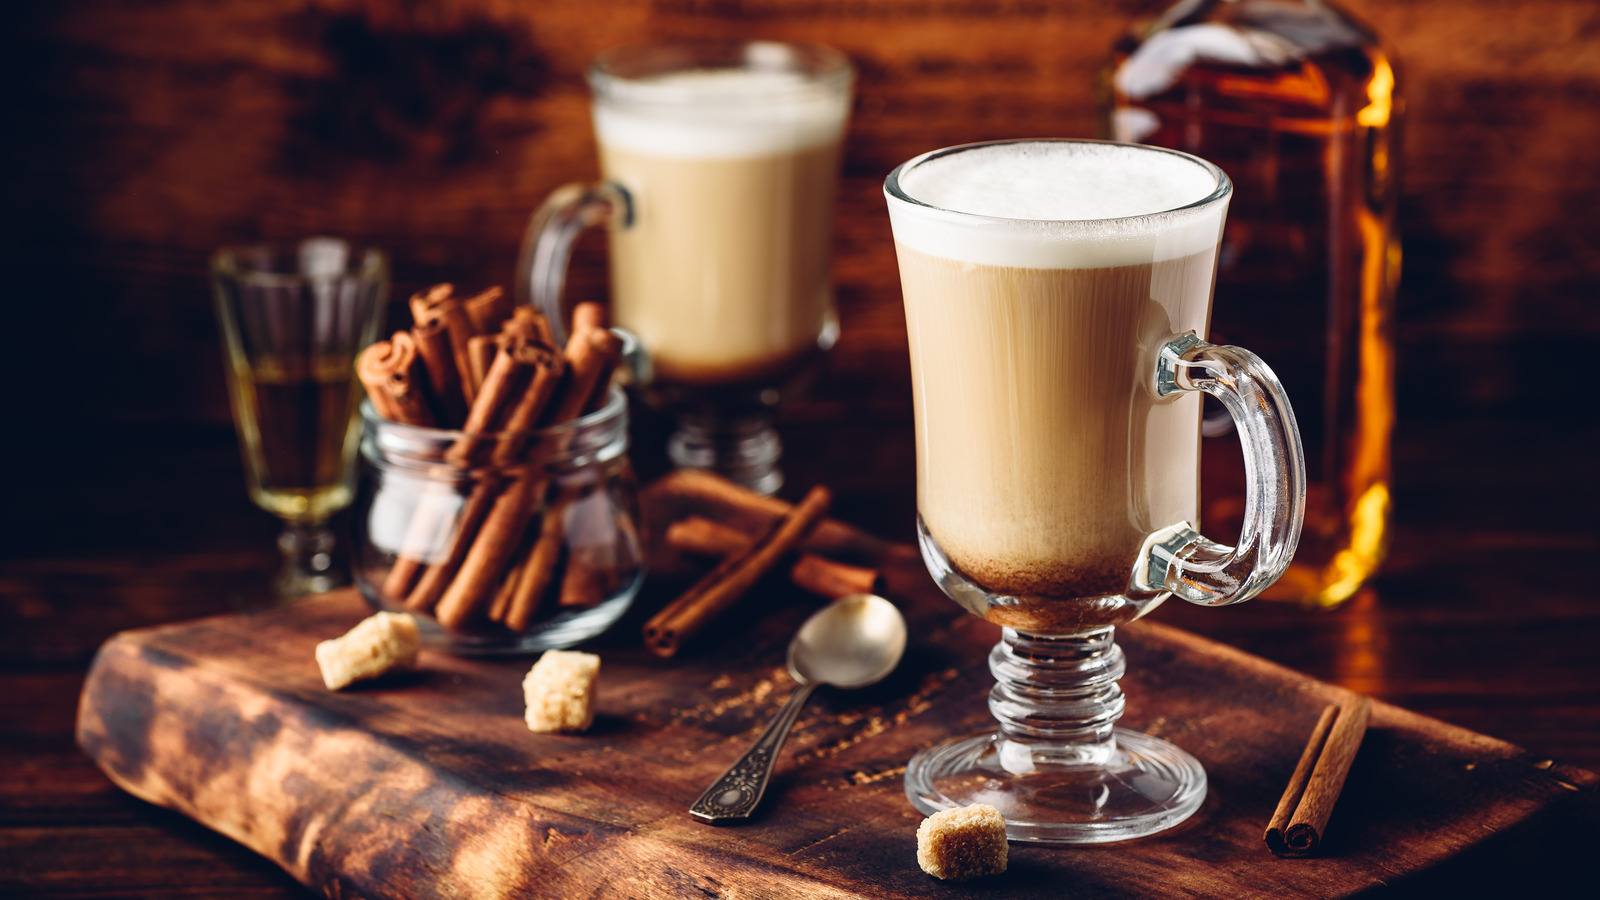 https://www.tastingtable.com/img/gallery/why-using-the-right-type-of-glass-is-important-for-irish-coffee/l-intro-1666274719.jpg